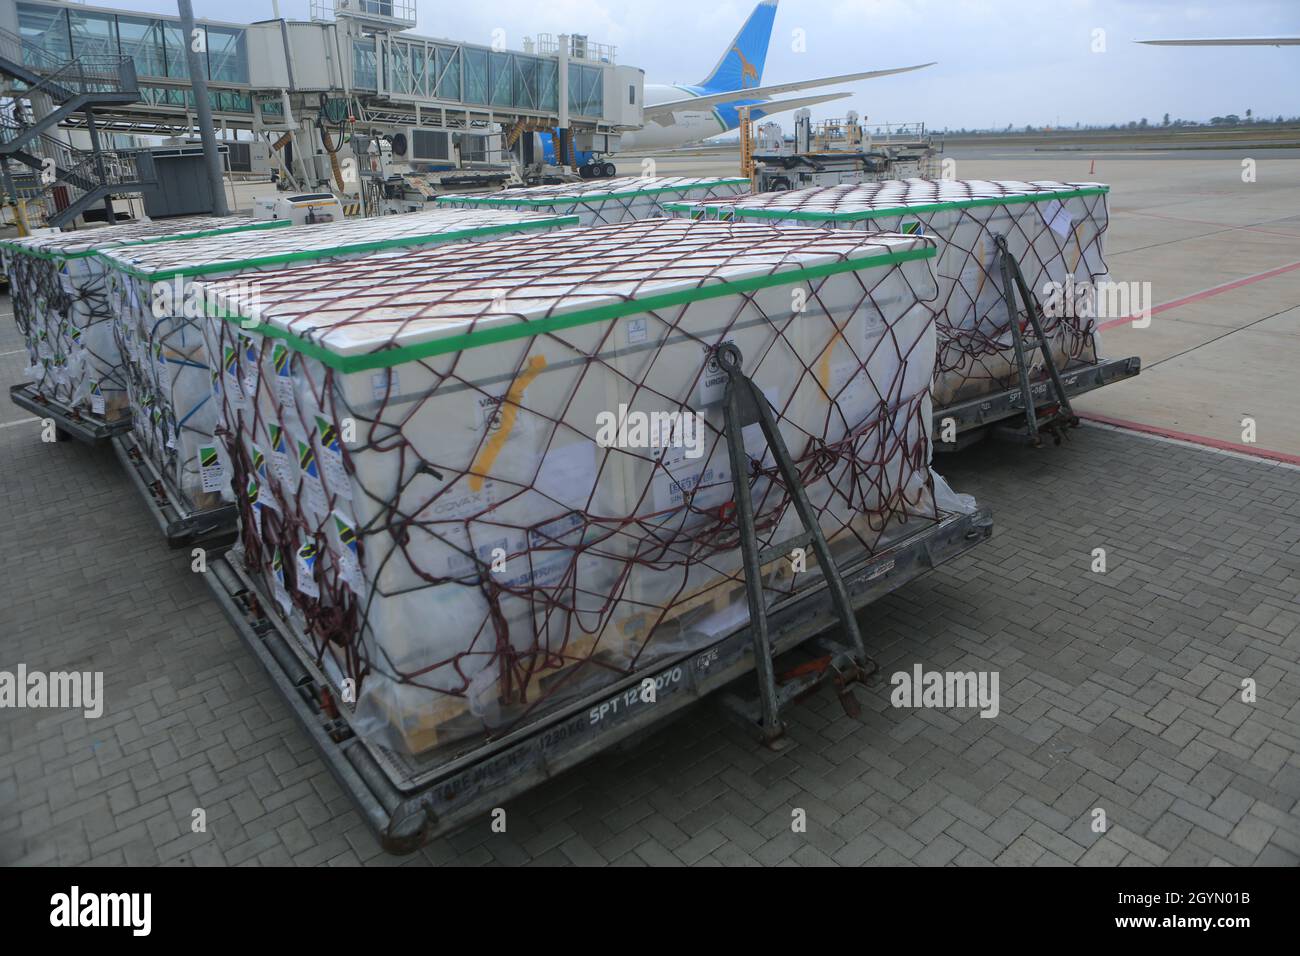 Dar Es Salaam, Tanzania. 8th Oct, 2021. A batch of the Sinopharm vaccine from China arrives at Julius Nyerere International Airport in Dar es Salaam, Tanzania, on Oct. 8, 2021. Tanzania on Friday received 1,065,600 doses of the Sinopharm vaccine from China under COVAX, boosting the east African nation's vaccination campaign against COVID-19. COVAX is a global program aimed at providing equitable access to COVID-19 vaccines. Credit: Herman Emmanuel/Xinhua/Alamy Live News Stock Photo